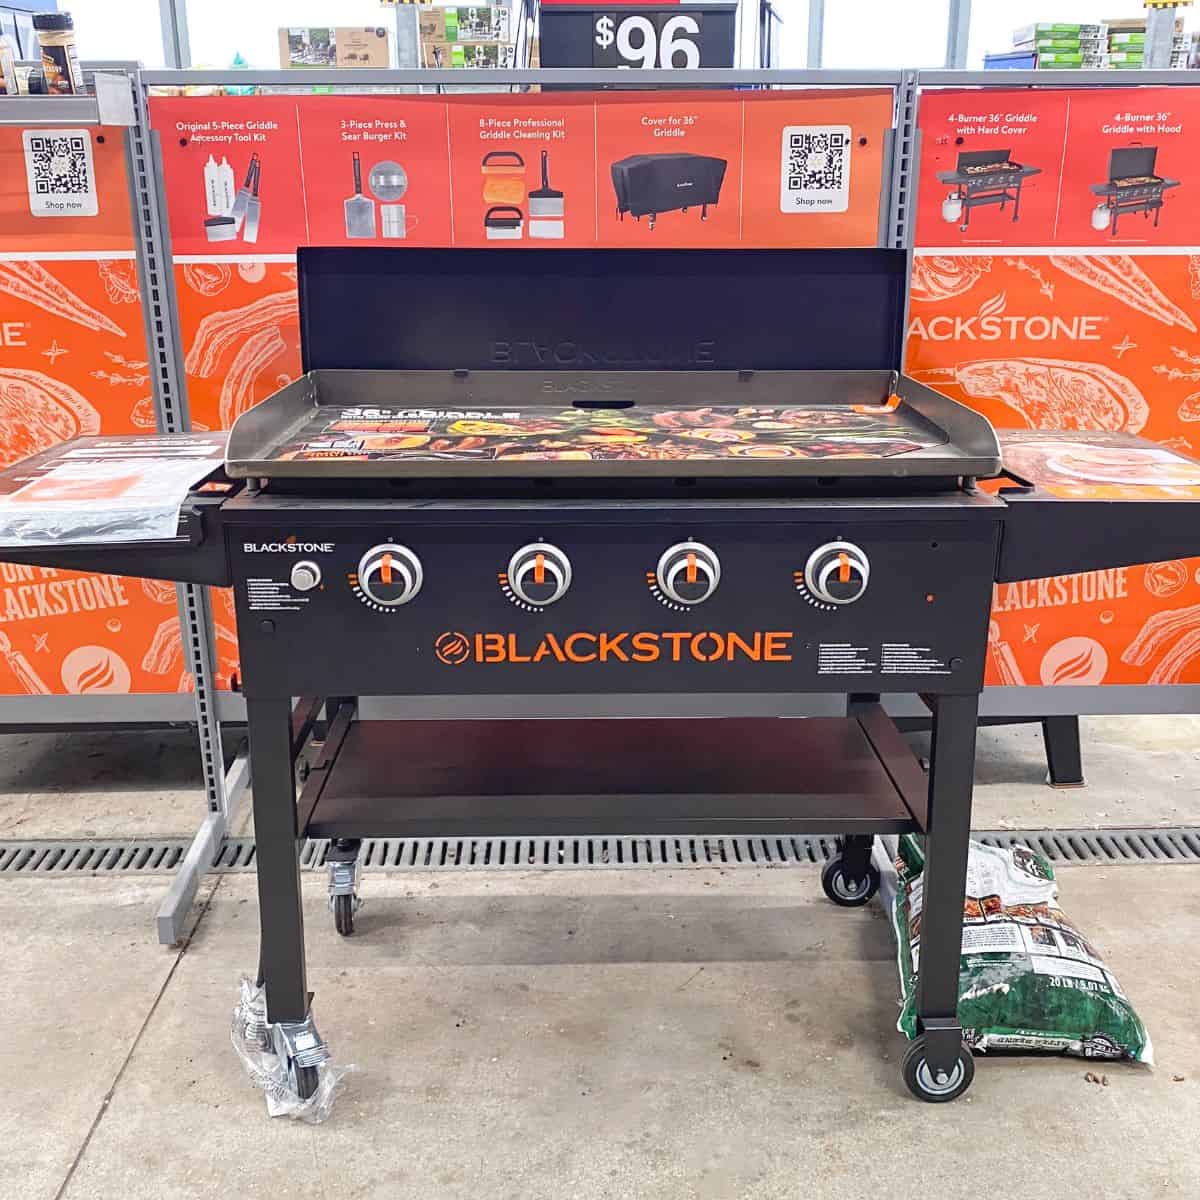 A large Blackstone grill on display in the store